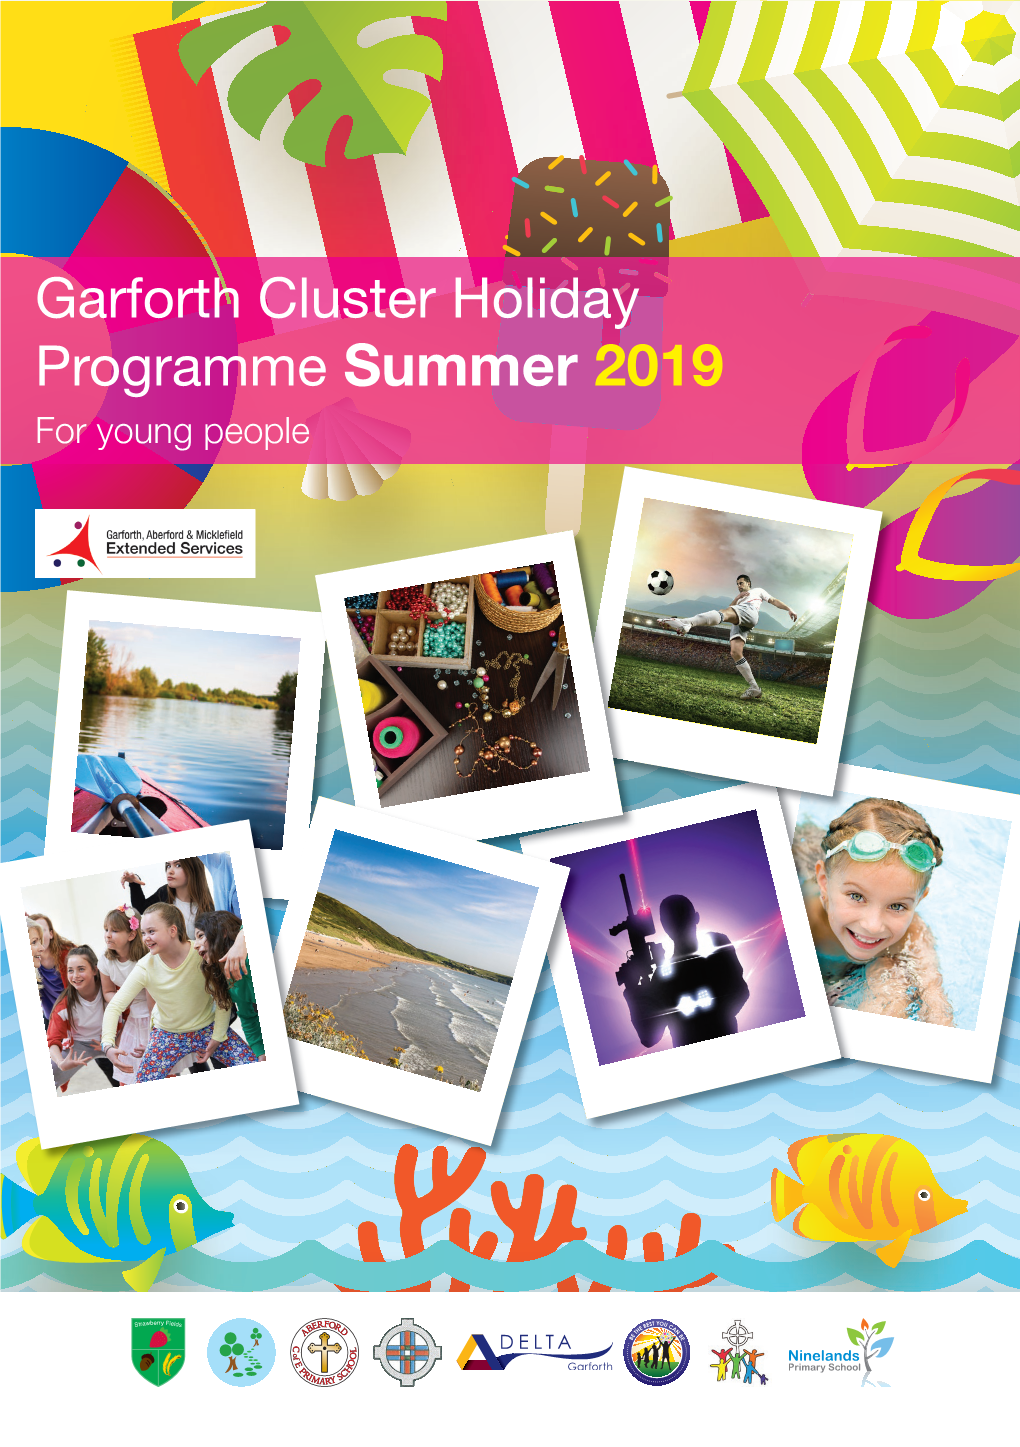 Garforth Cluster Holiday Programme Summer 2019 for Young People